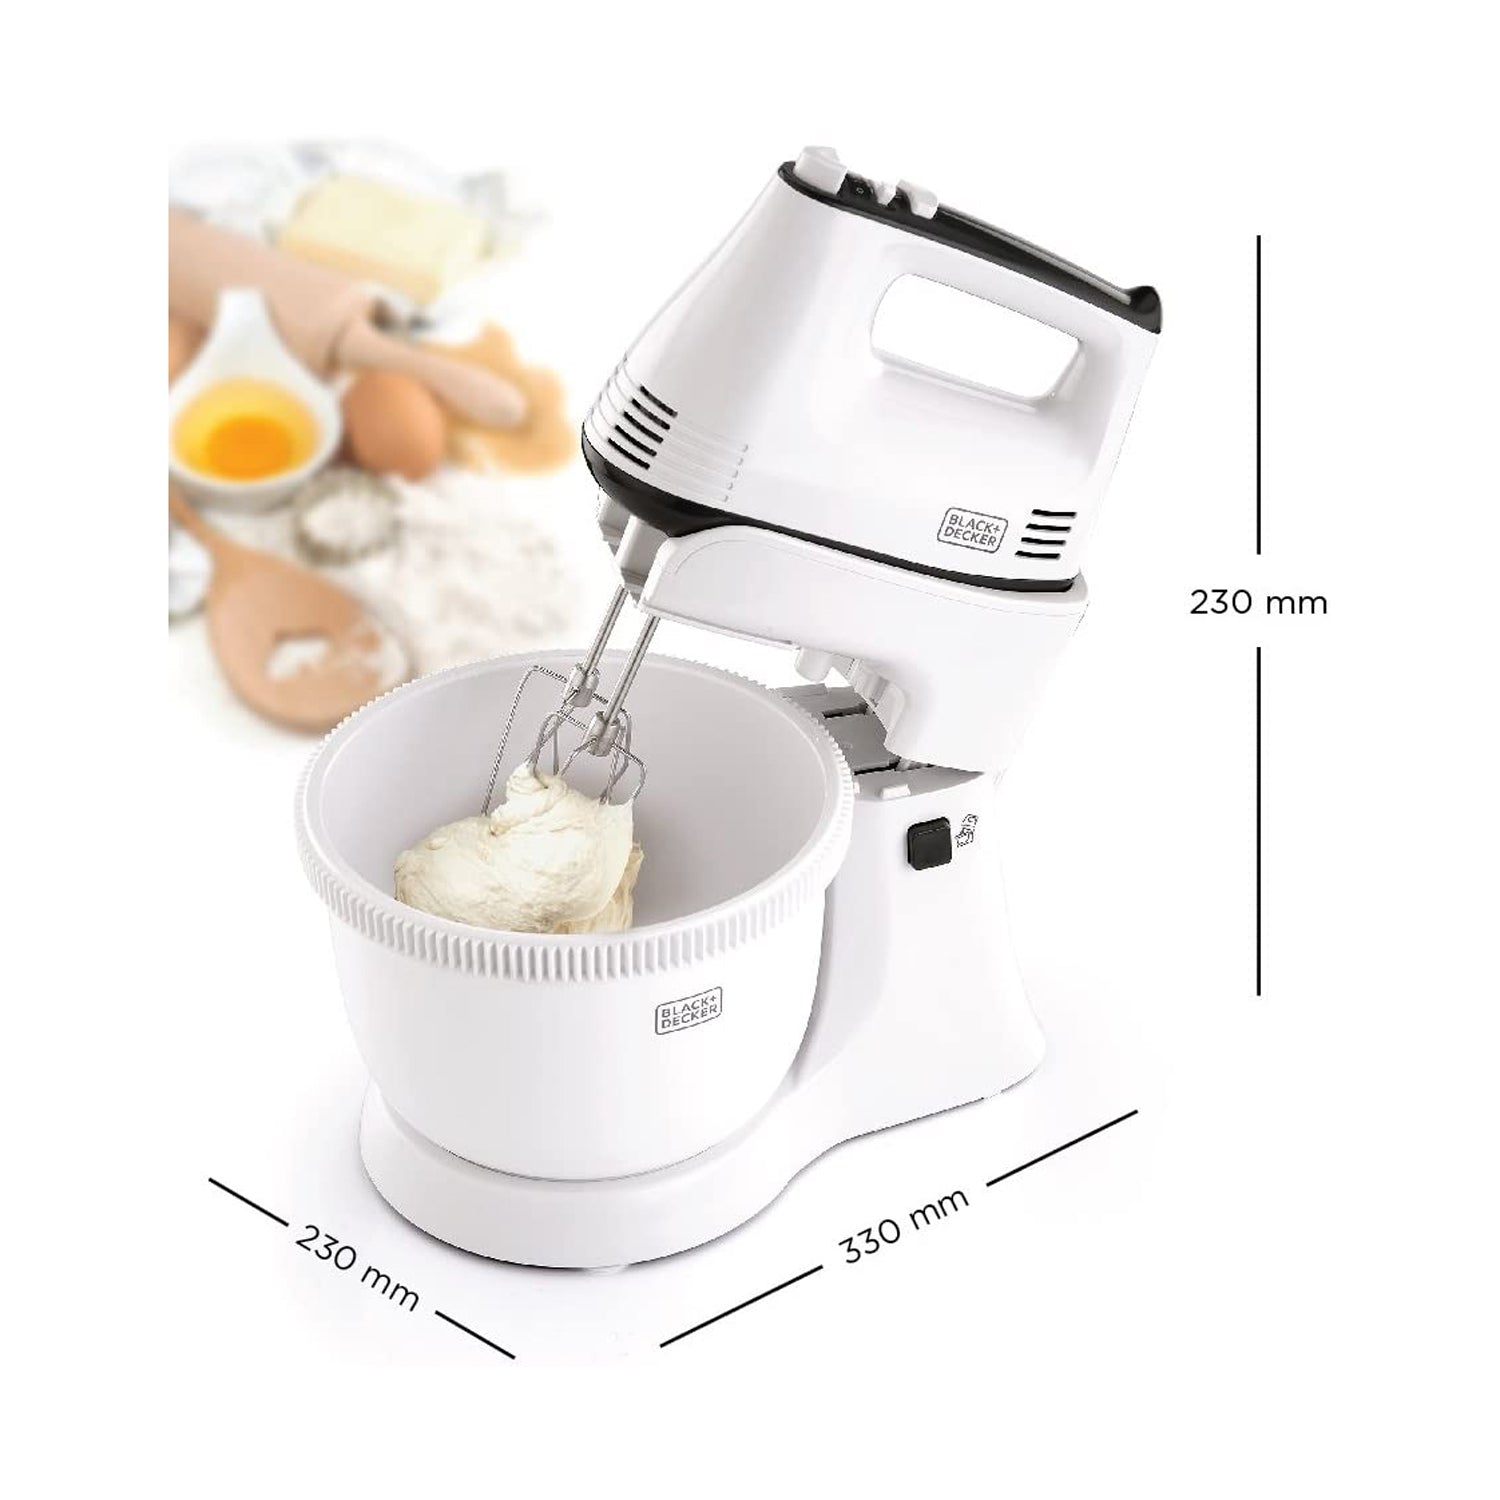 Black+Decker 300w 5 Speed Multifunction Bowl And Stand Mixer, White - M700, 2 Years Warranty